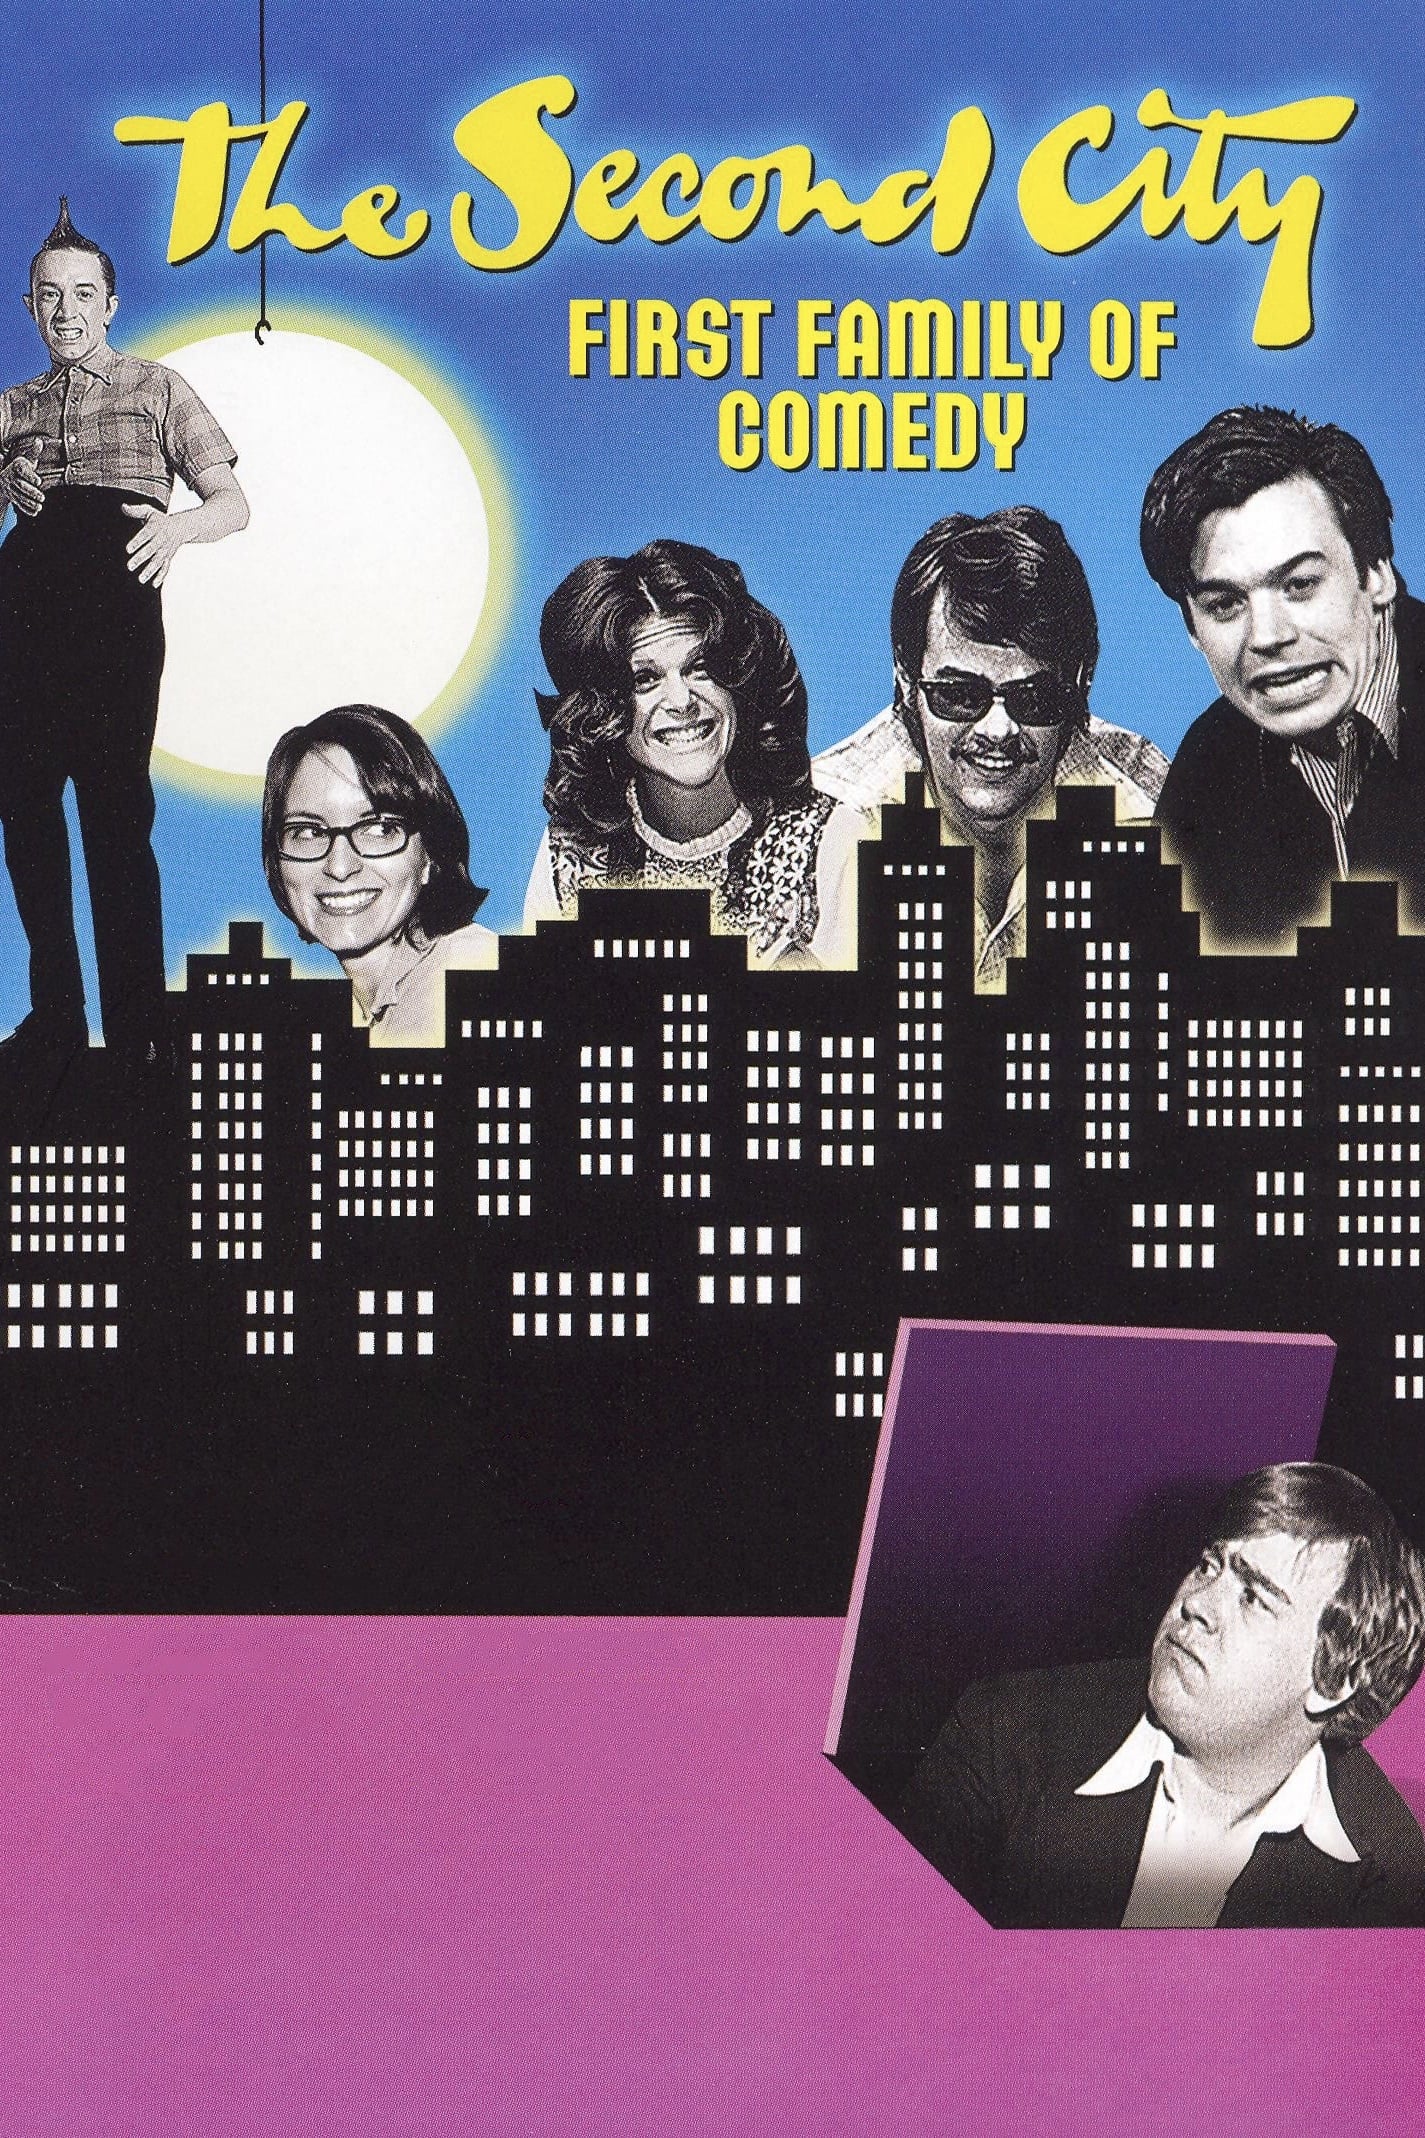 Second City: First Family of Comedy (2006)